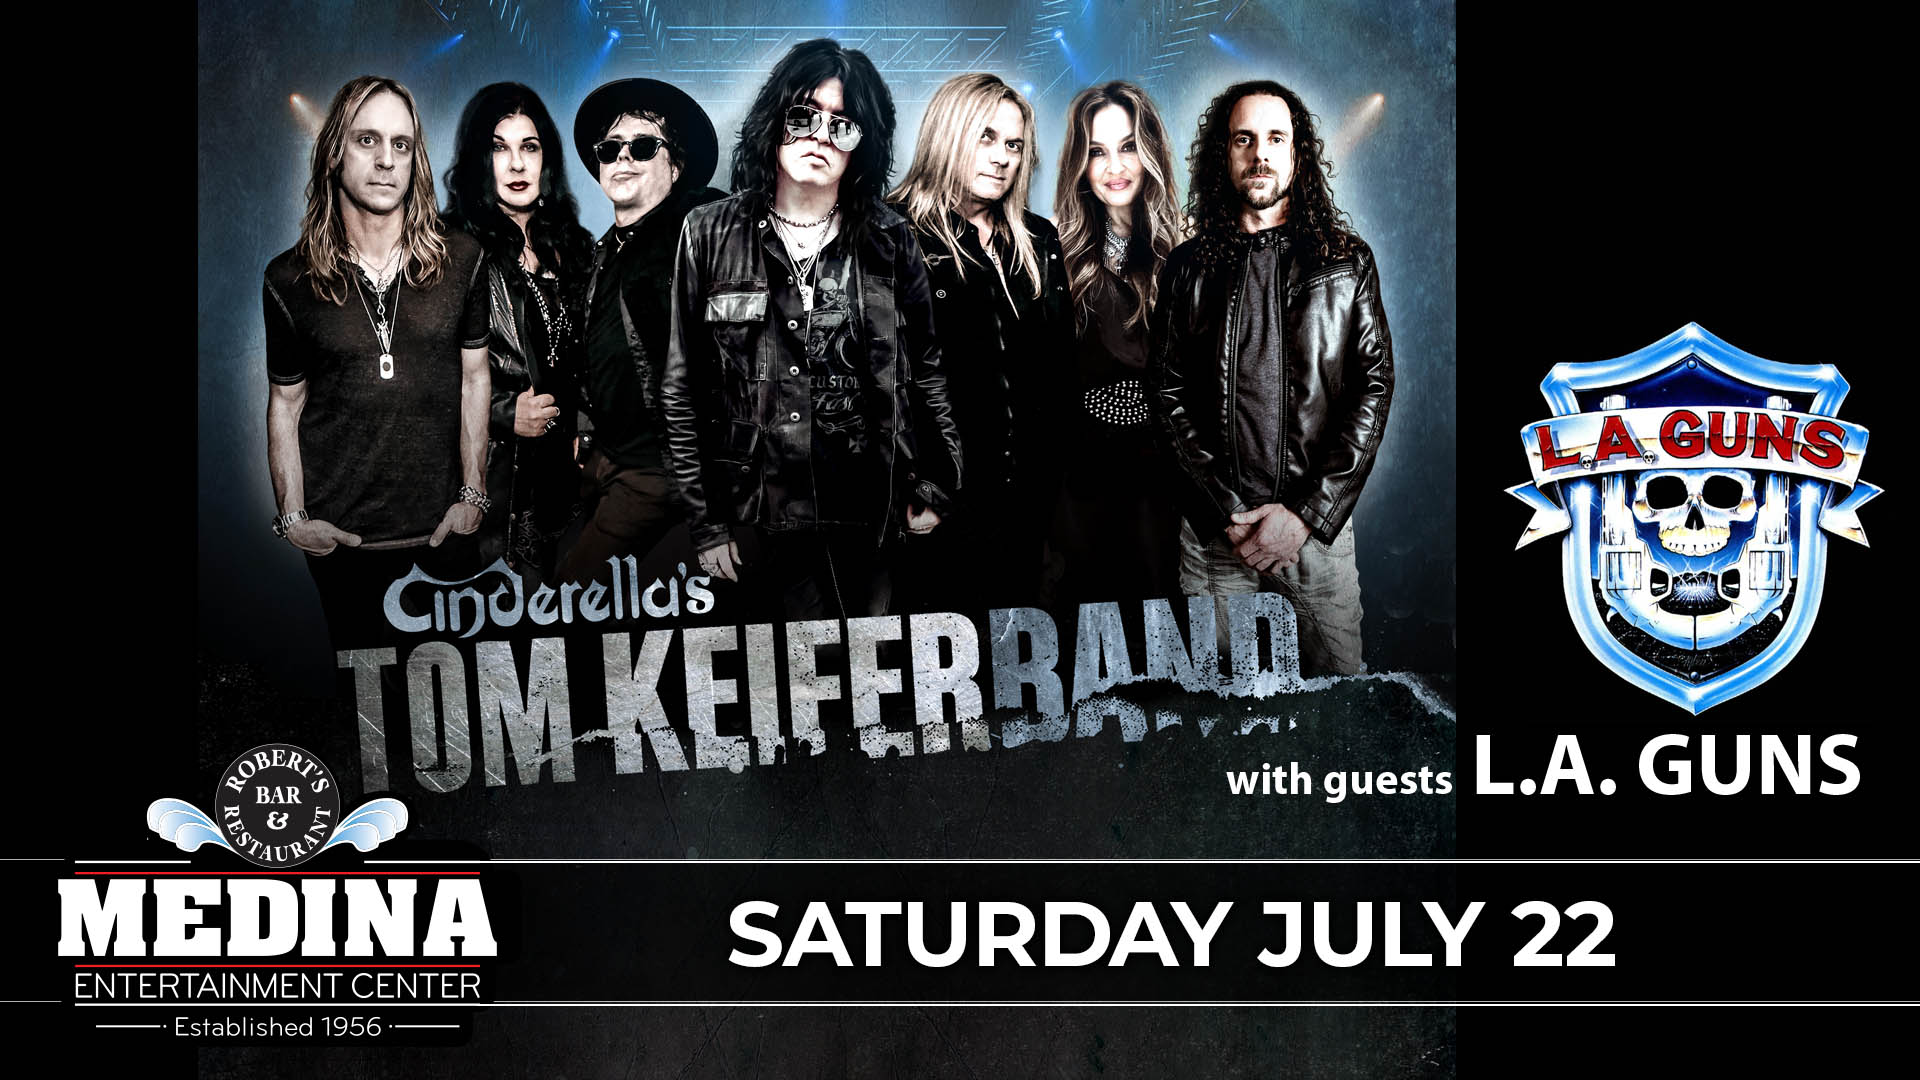 Cinderella’s Tom Keifer Band with guest L.A. Guns Medina Entertainment Center Saturday, July 22ND, 2023 Doors: 7:00PM | Music: 8:00PM | 21+ Tickets on-sale Friday, April 5th at 11AM General Admission $37 Advance / $42 Day Of Show plus applicable fees